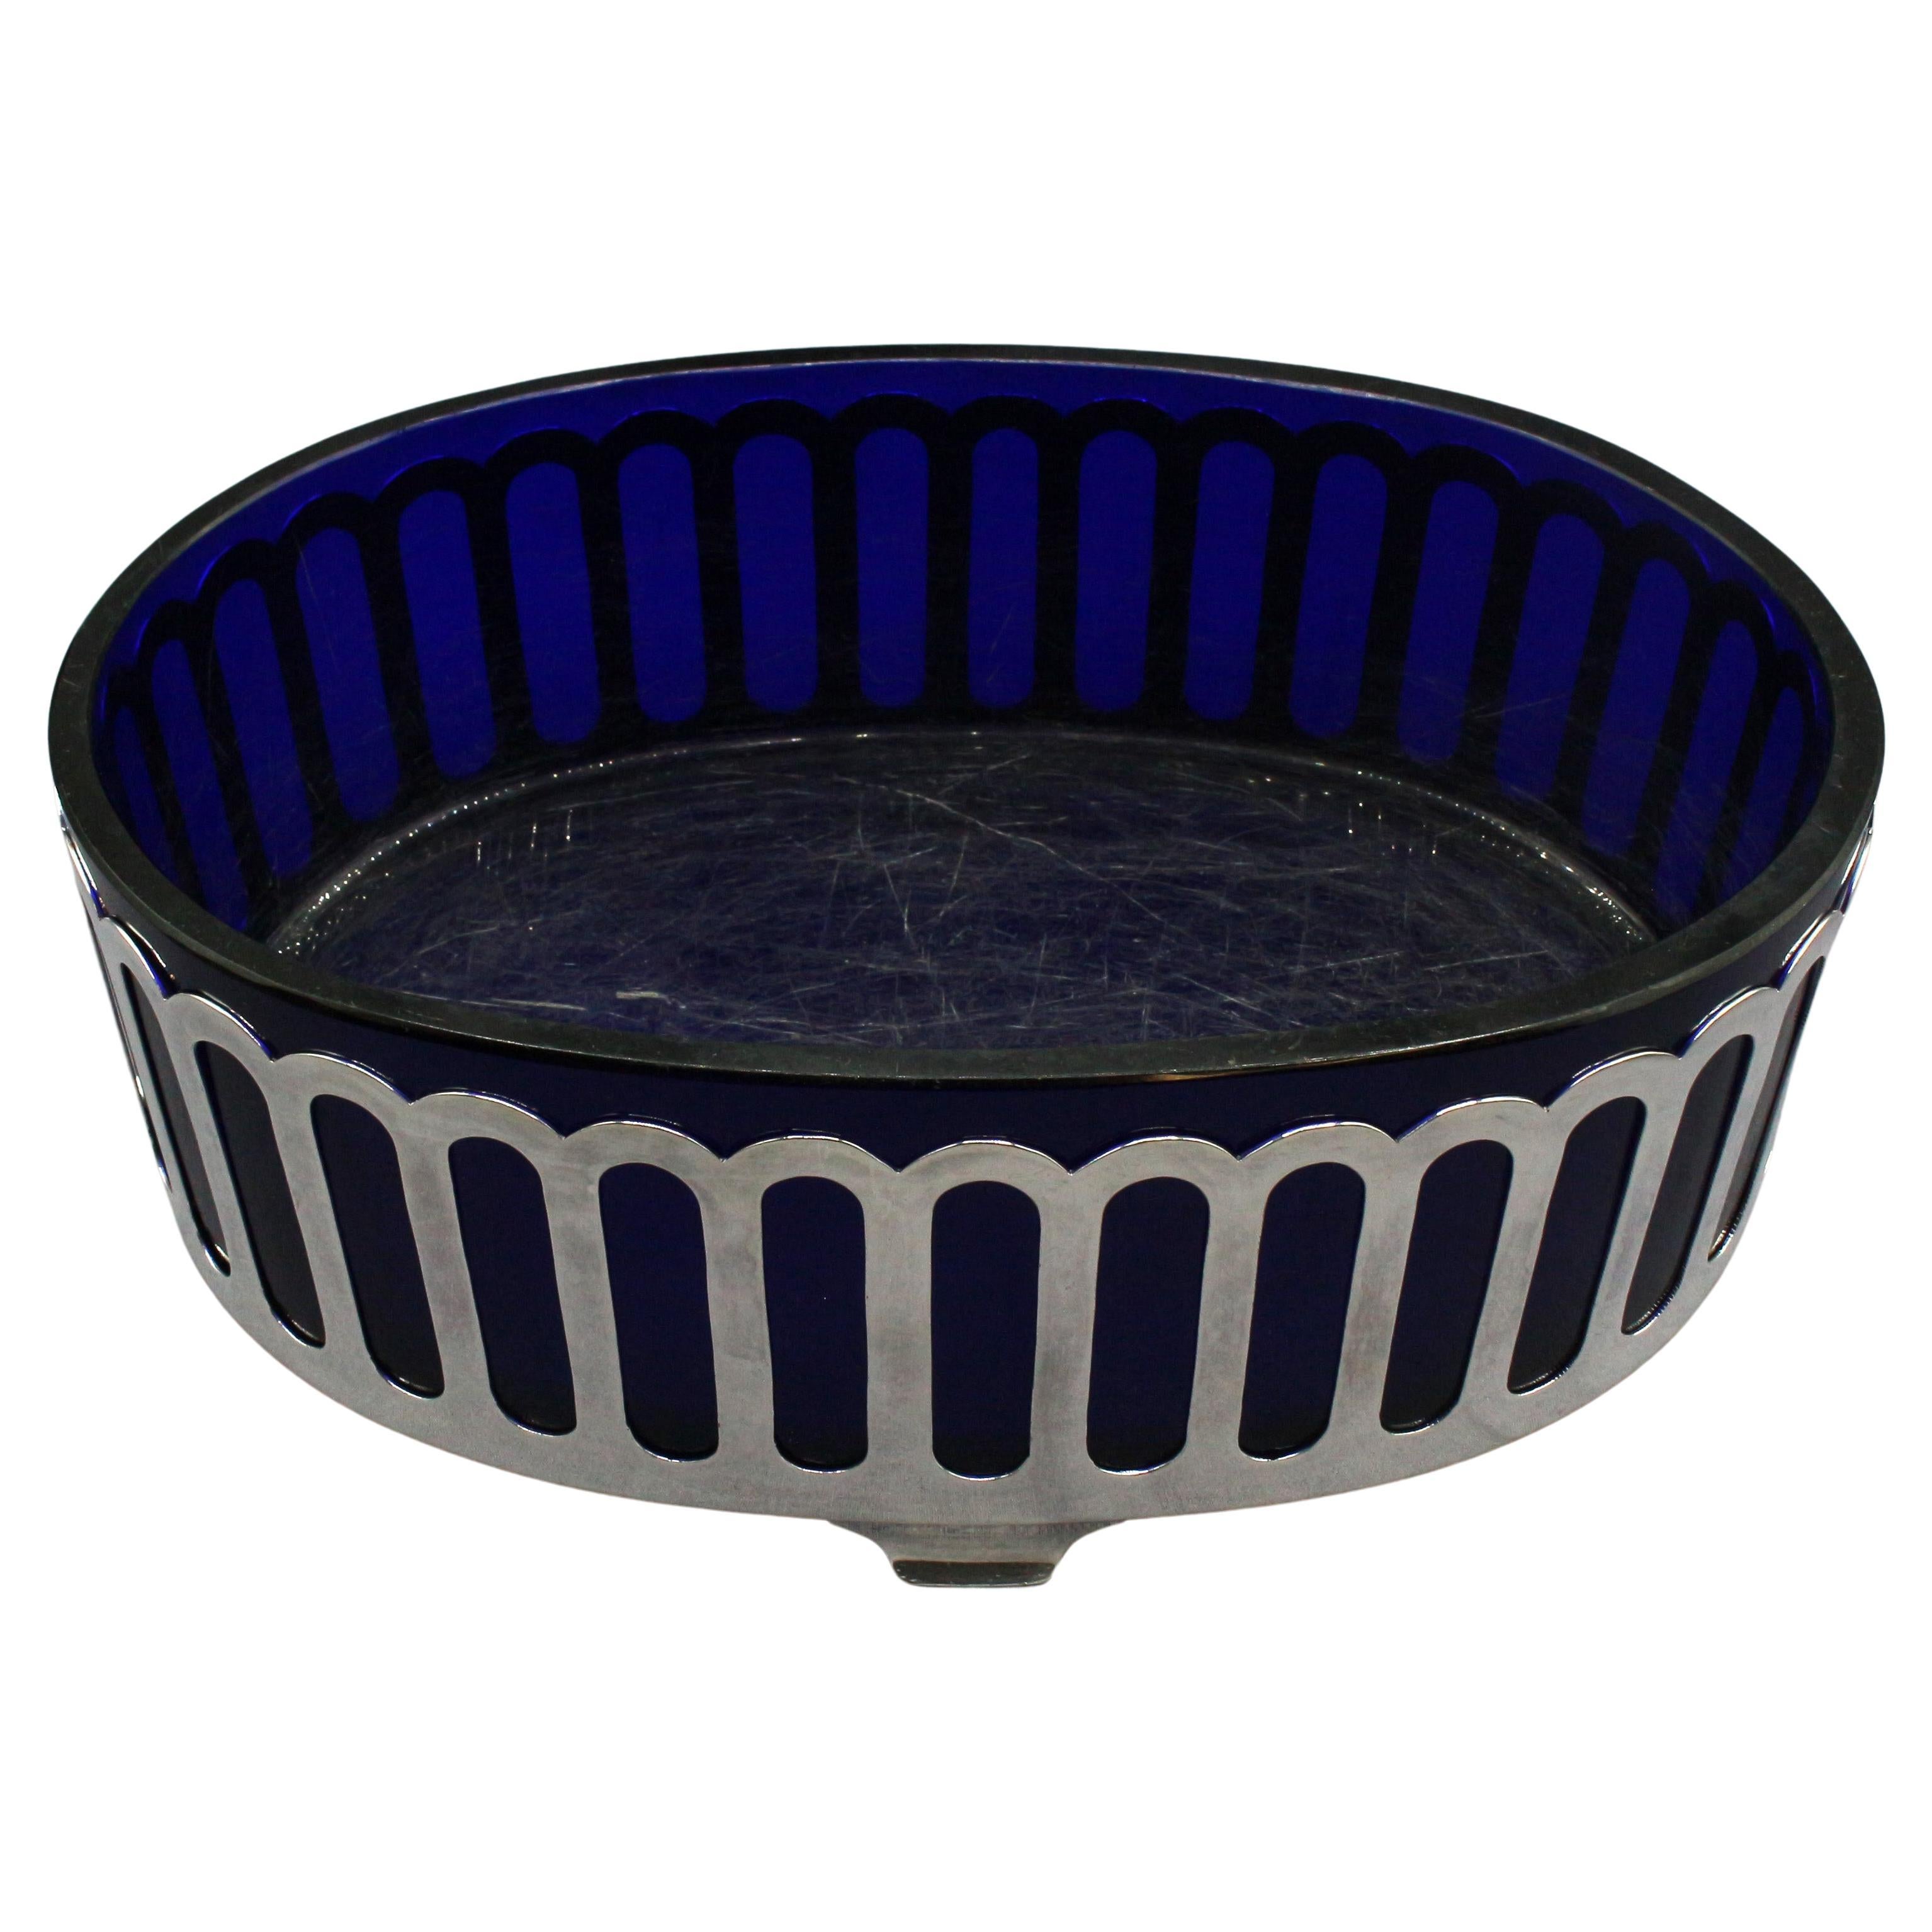 c. 1930s Art Deco Cobalt Glass & Silver Plated Serving Dish